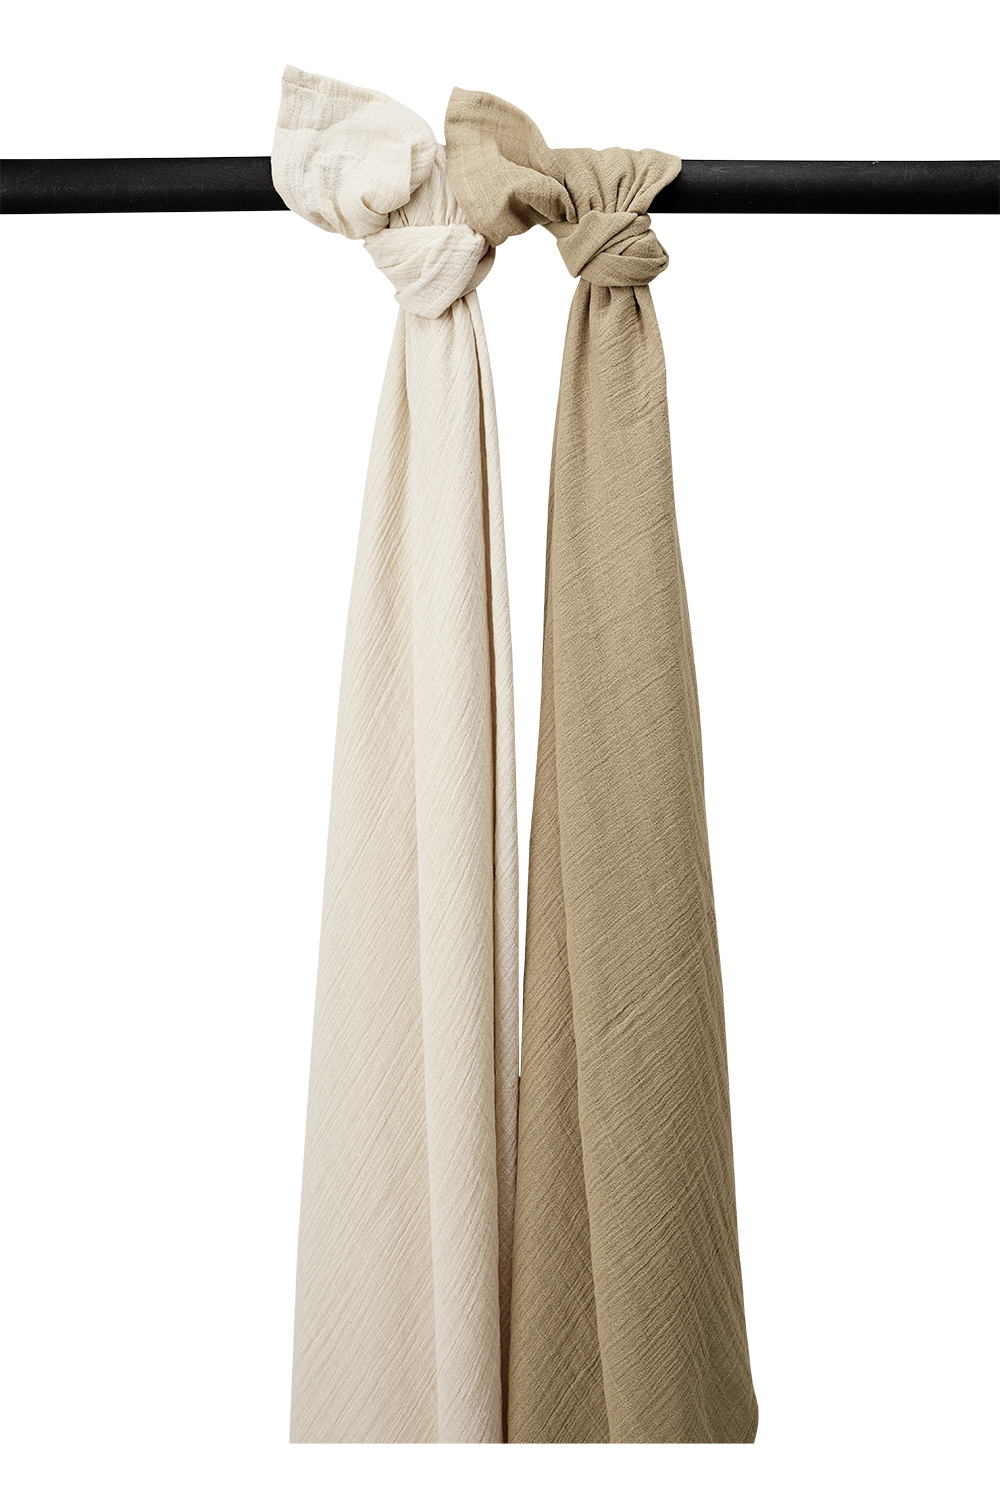 Swaddle  2er pack pre-washed musselin Uni - soft sand/taupe - 120x120cm